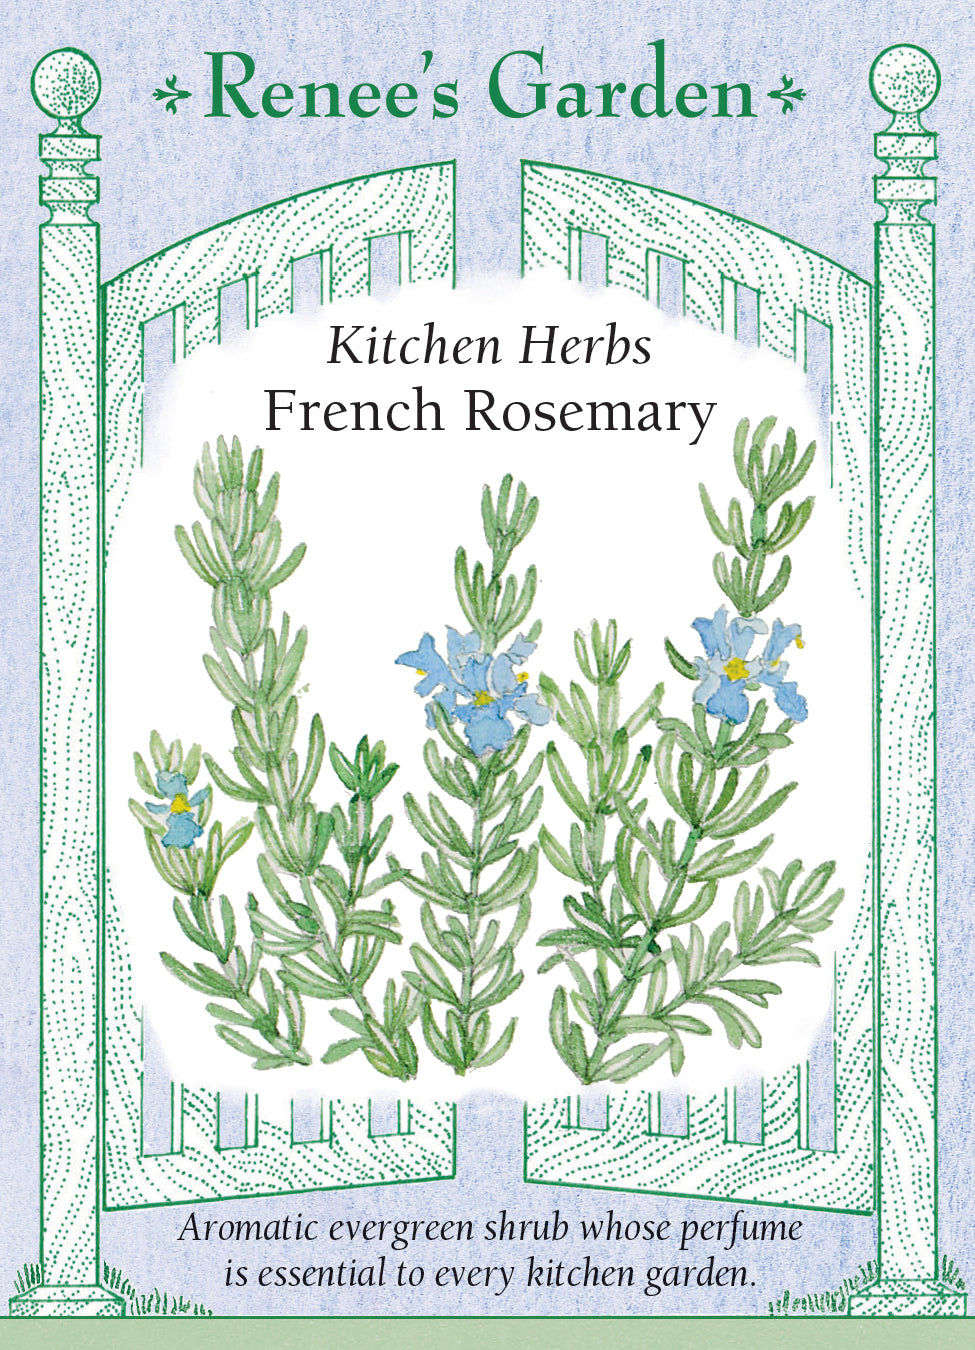 French Rosemary' Kitchen Herbs